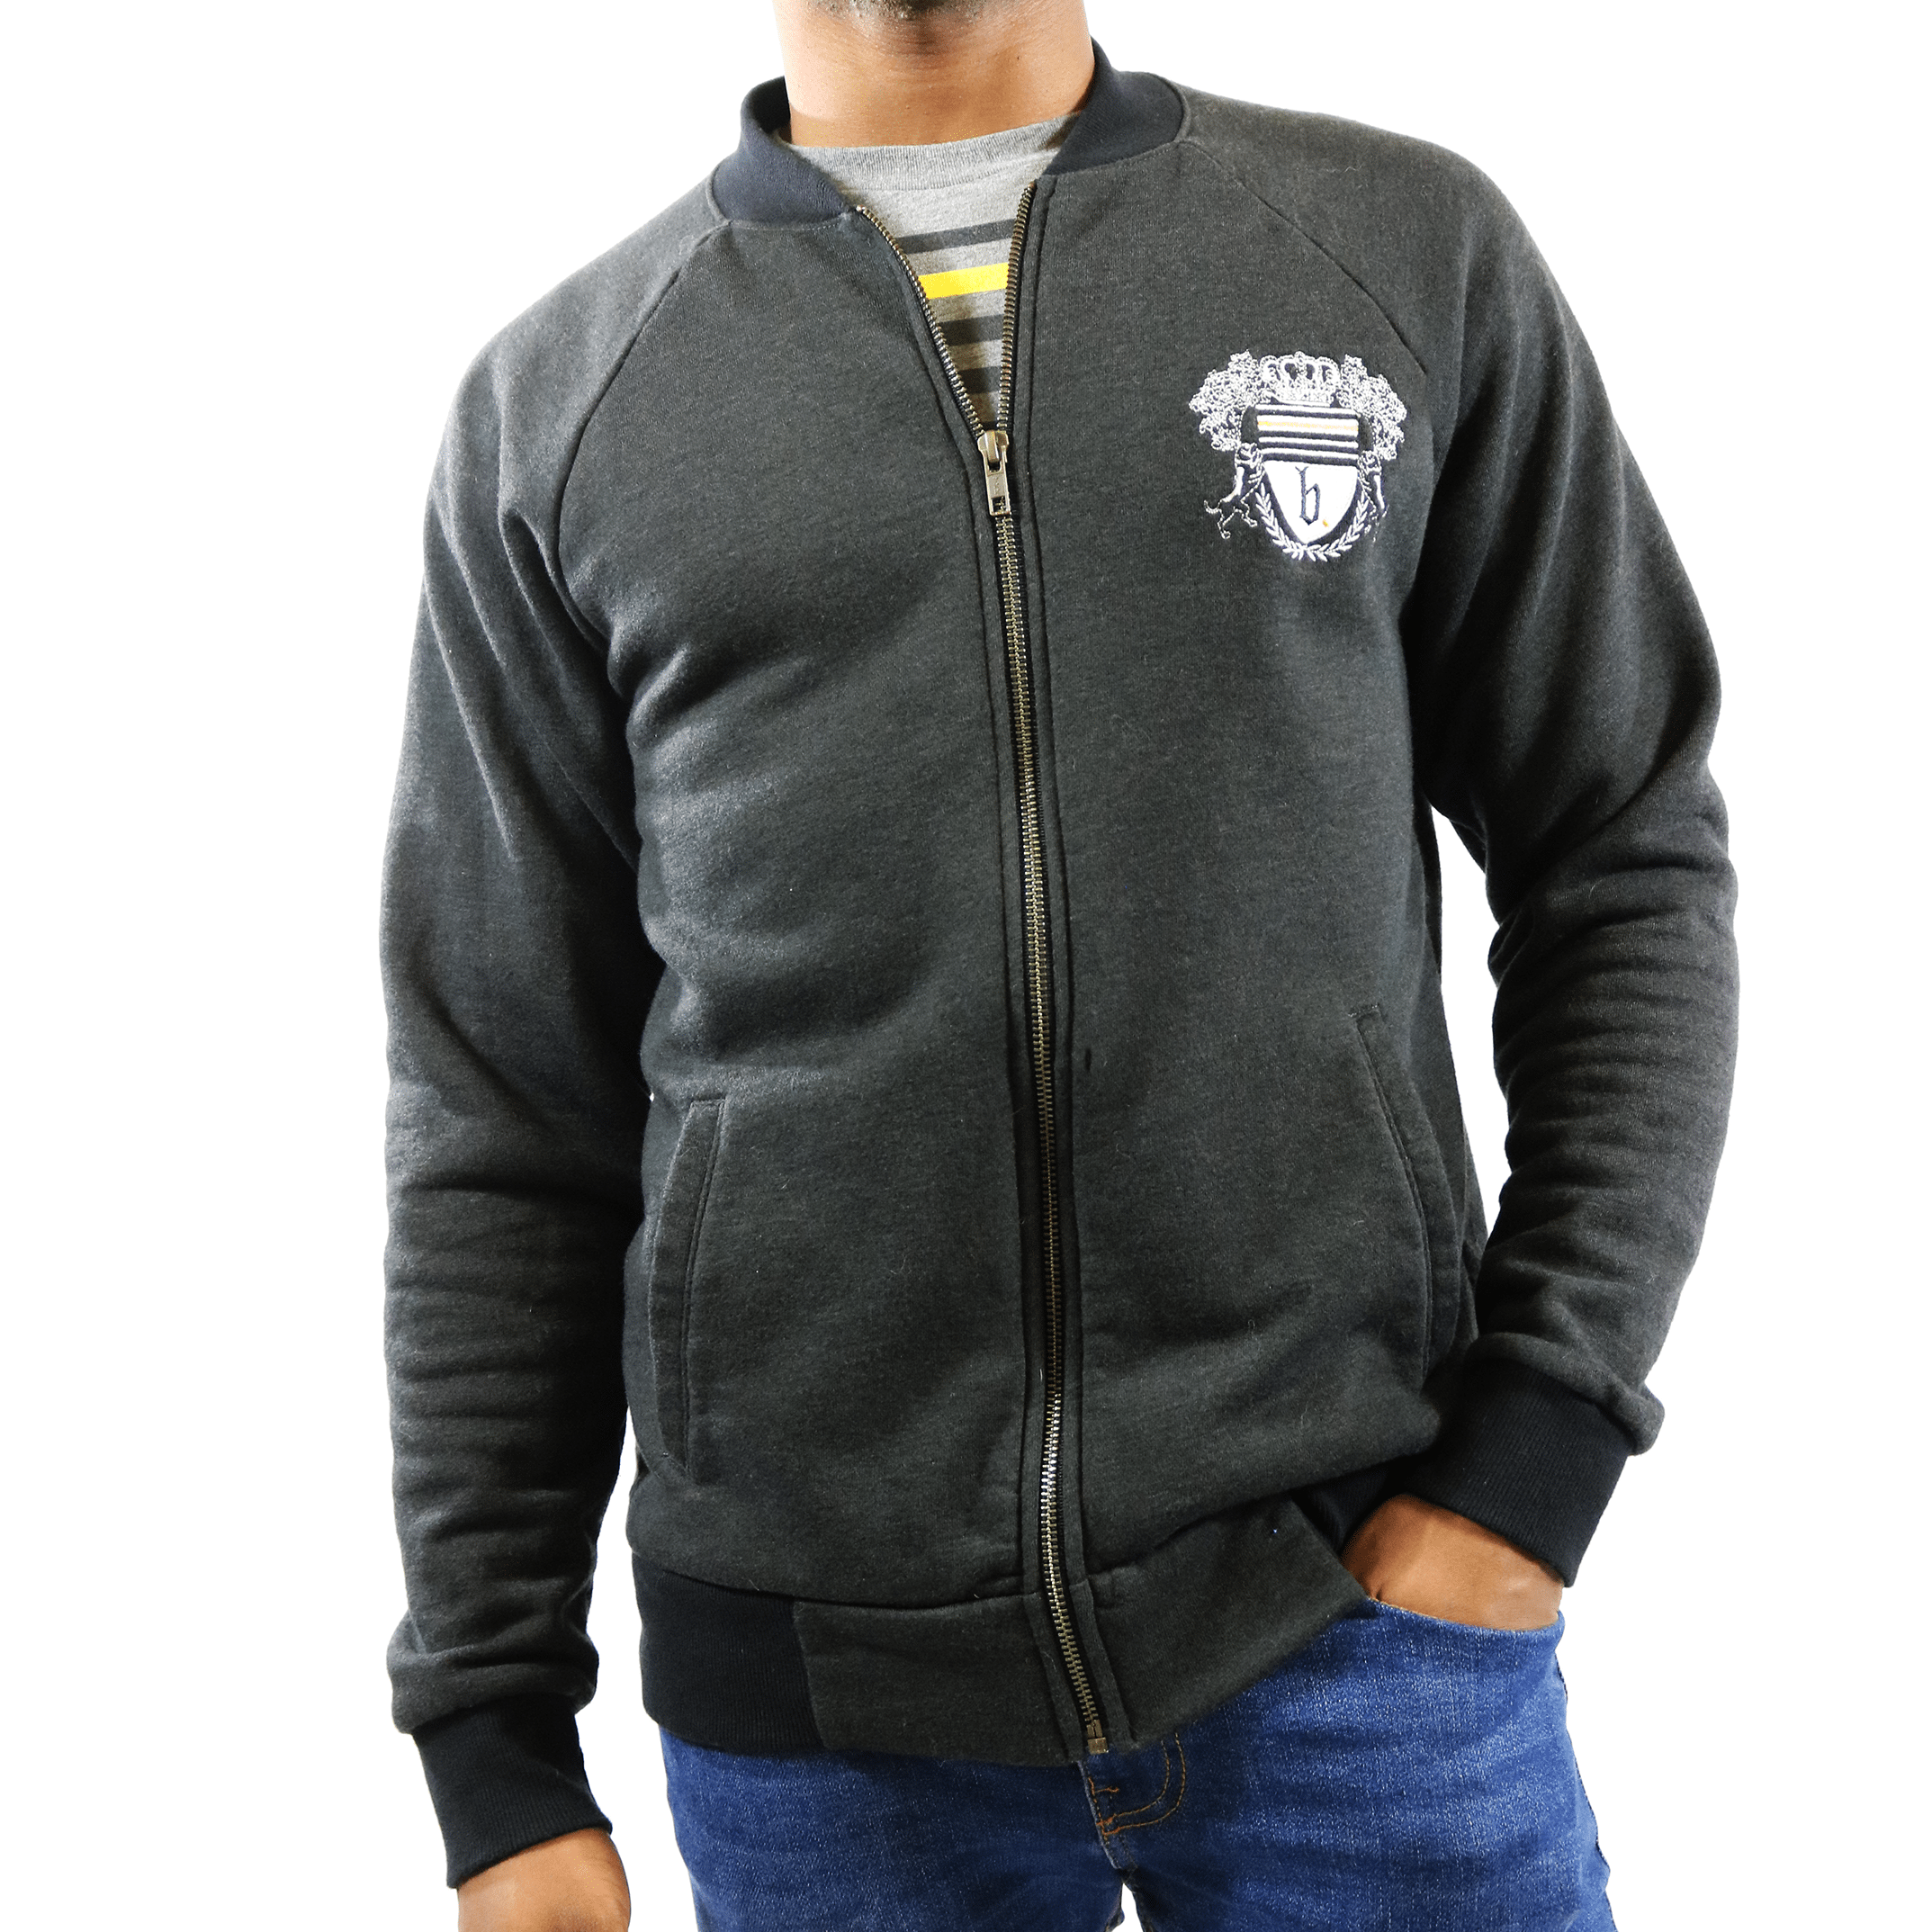 The Crest Jersey Bomber Jacket